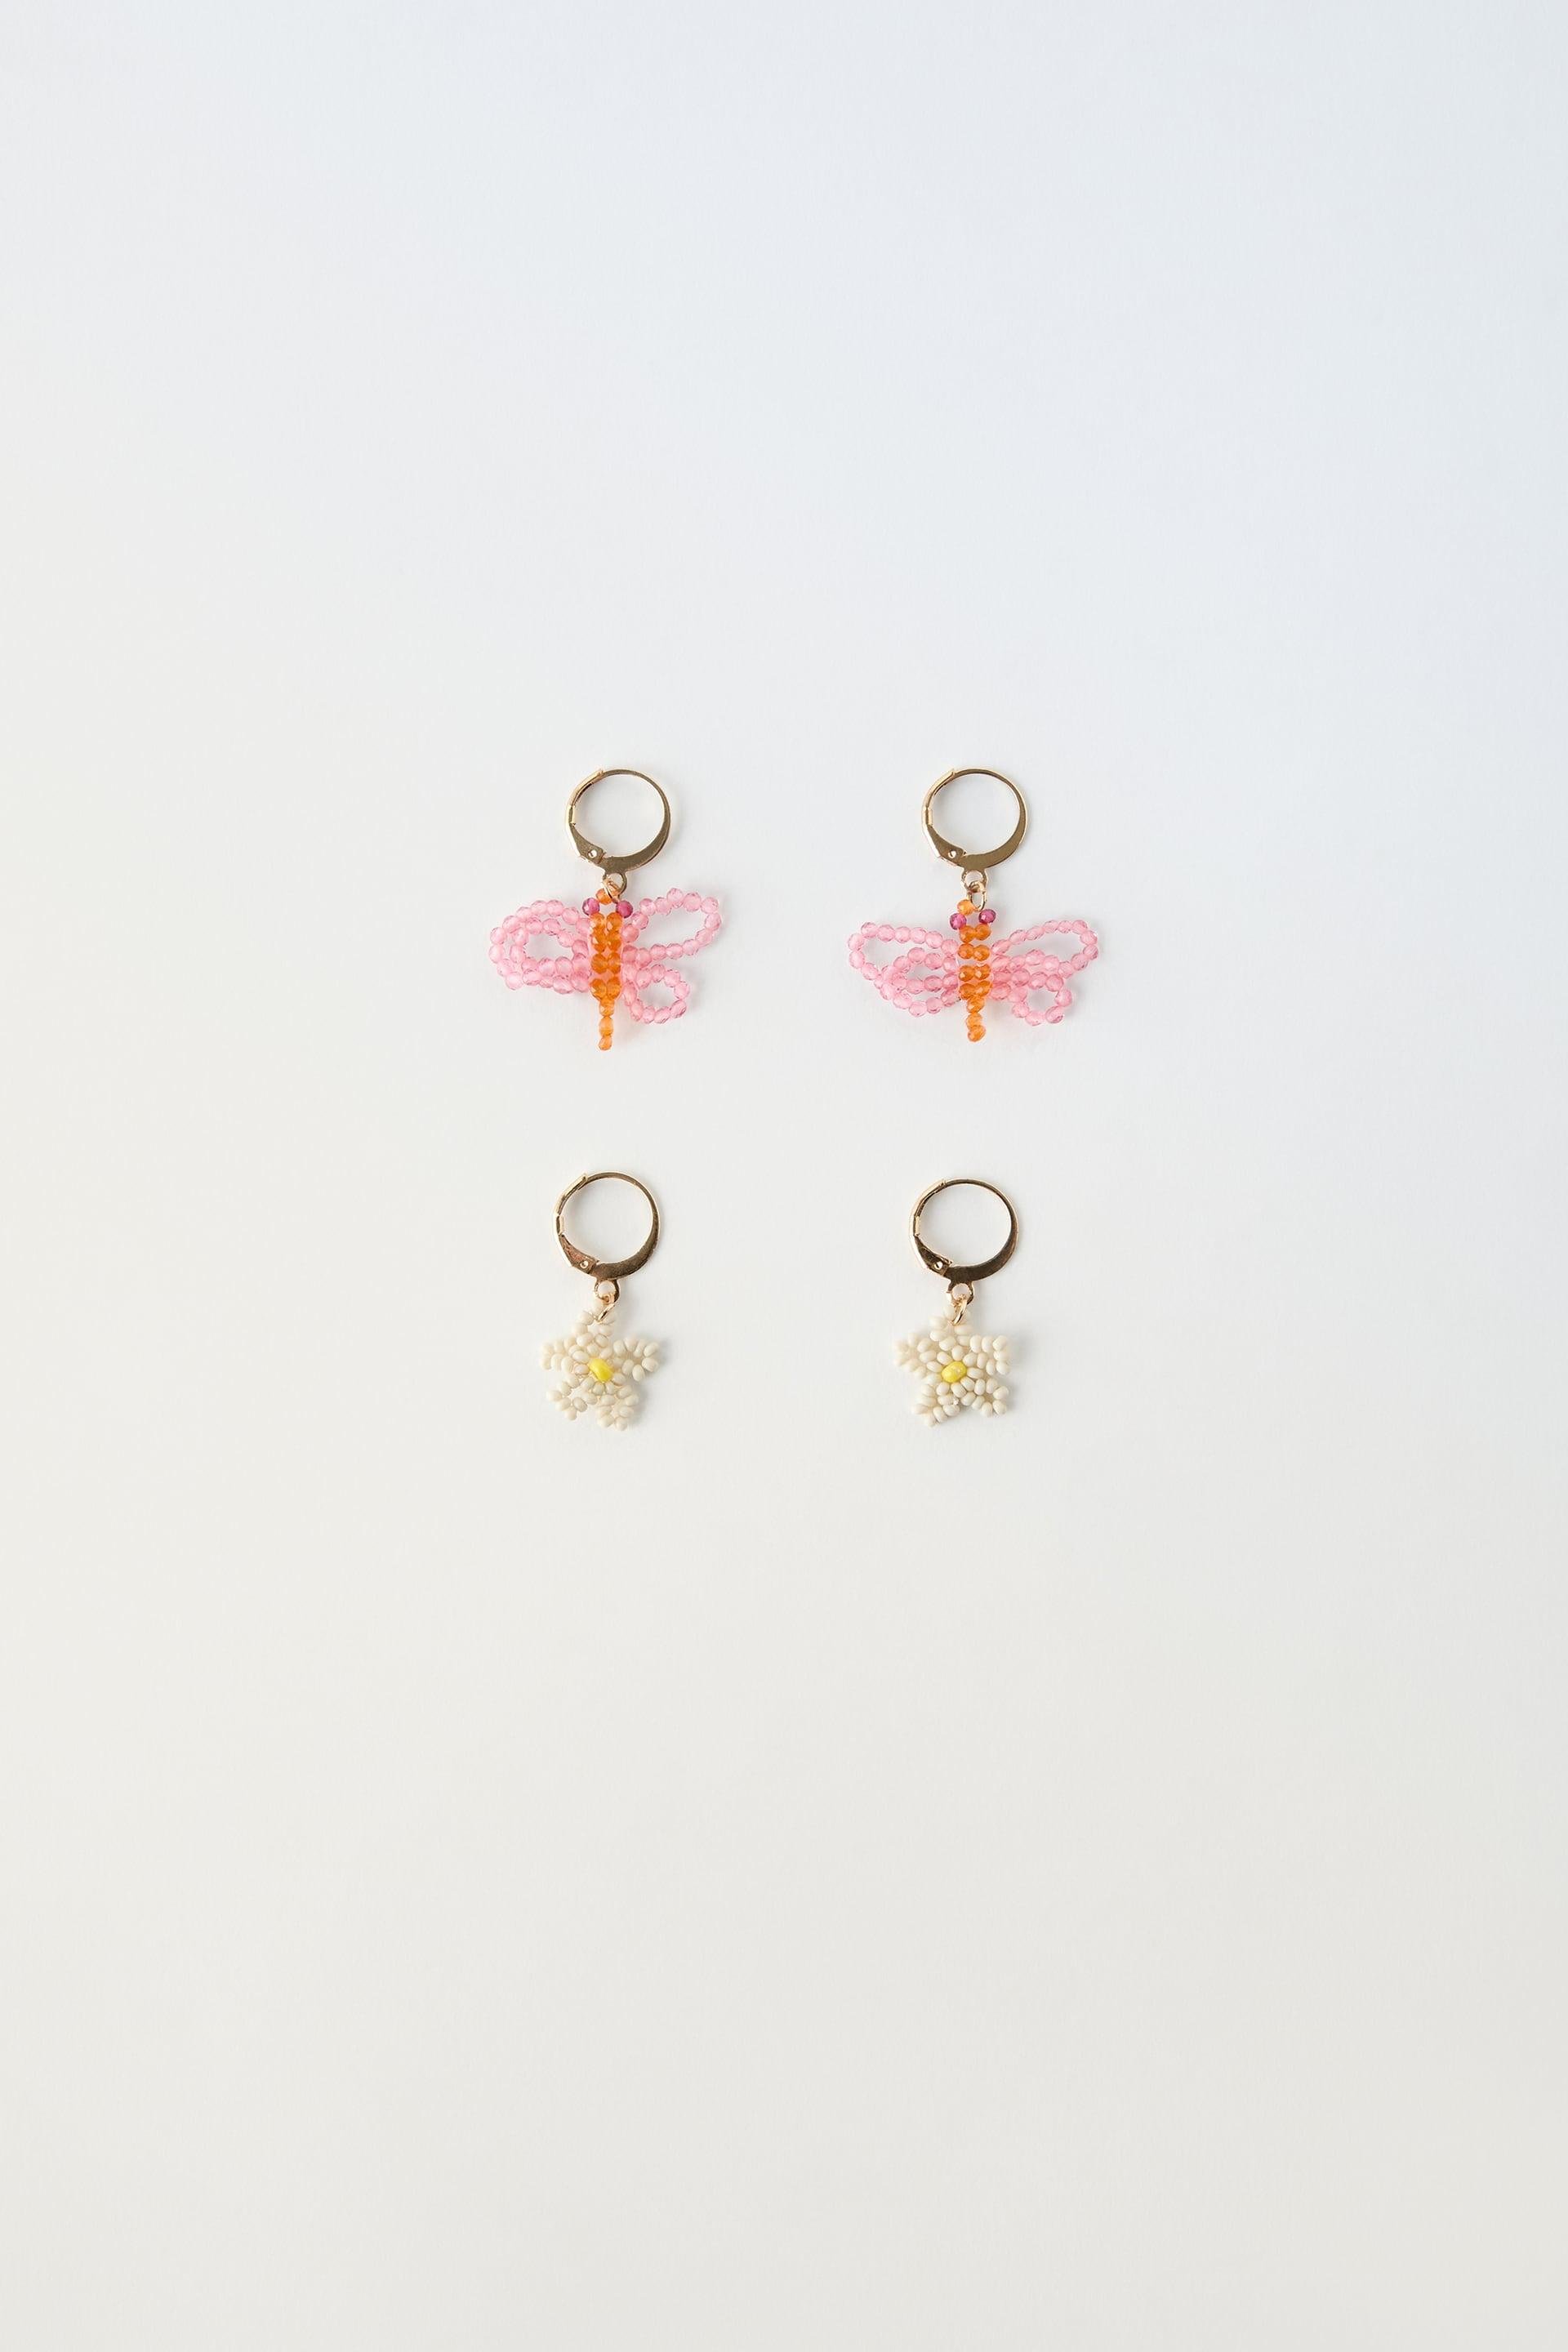 TWO-PACK OF FLORAL AND DRAGONFLY EARRINGS by ZARA